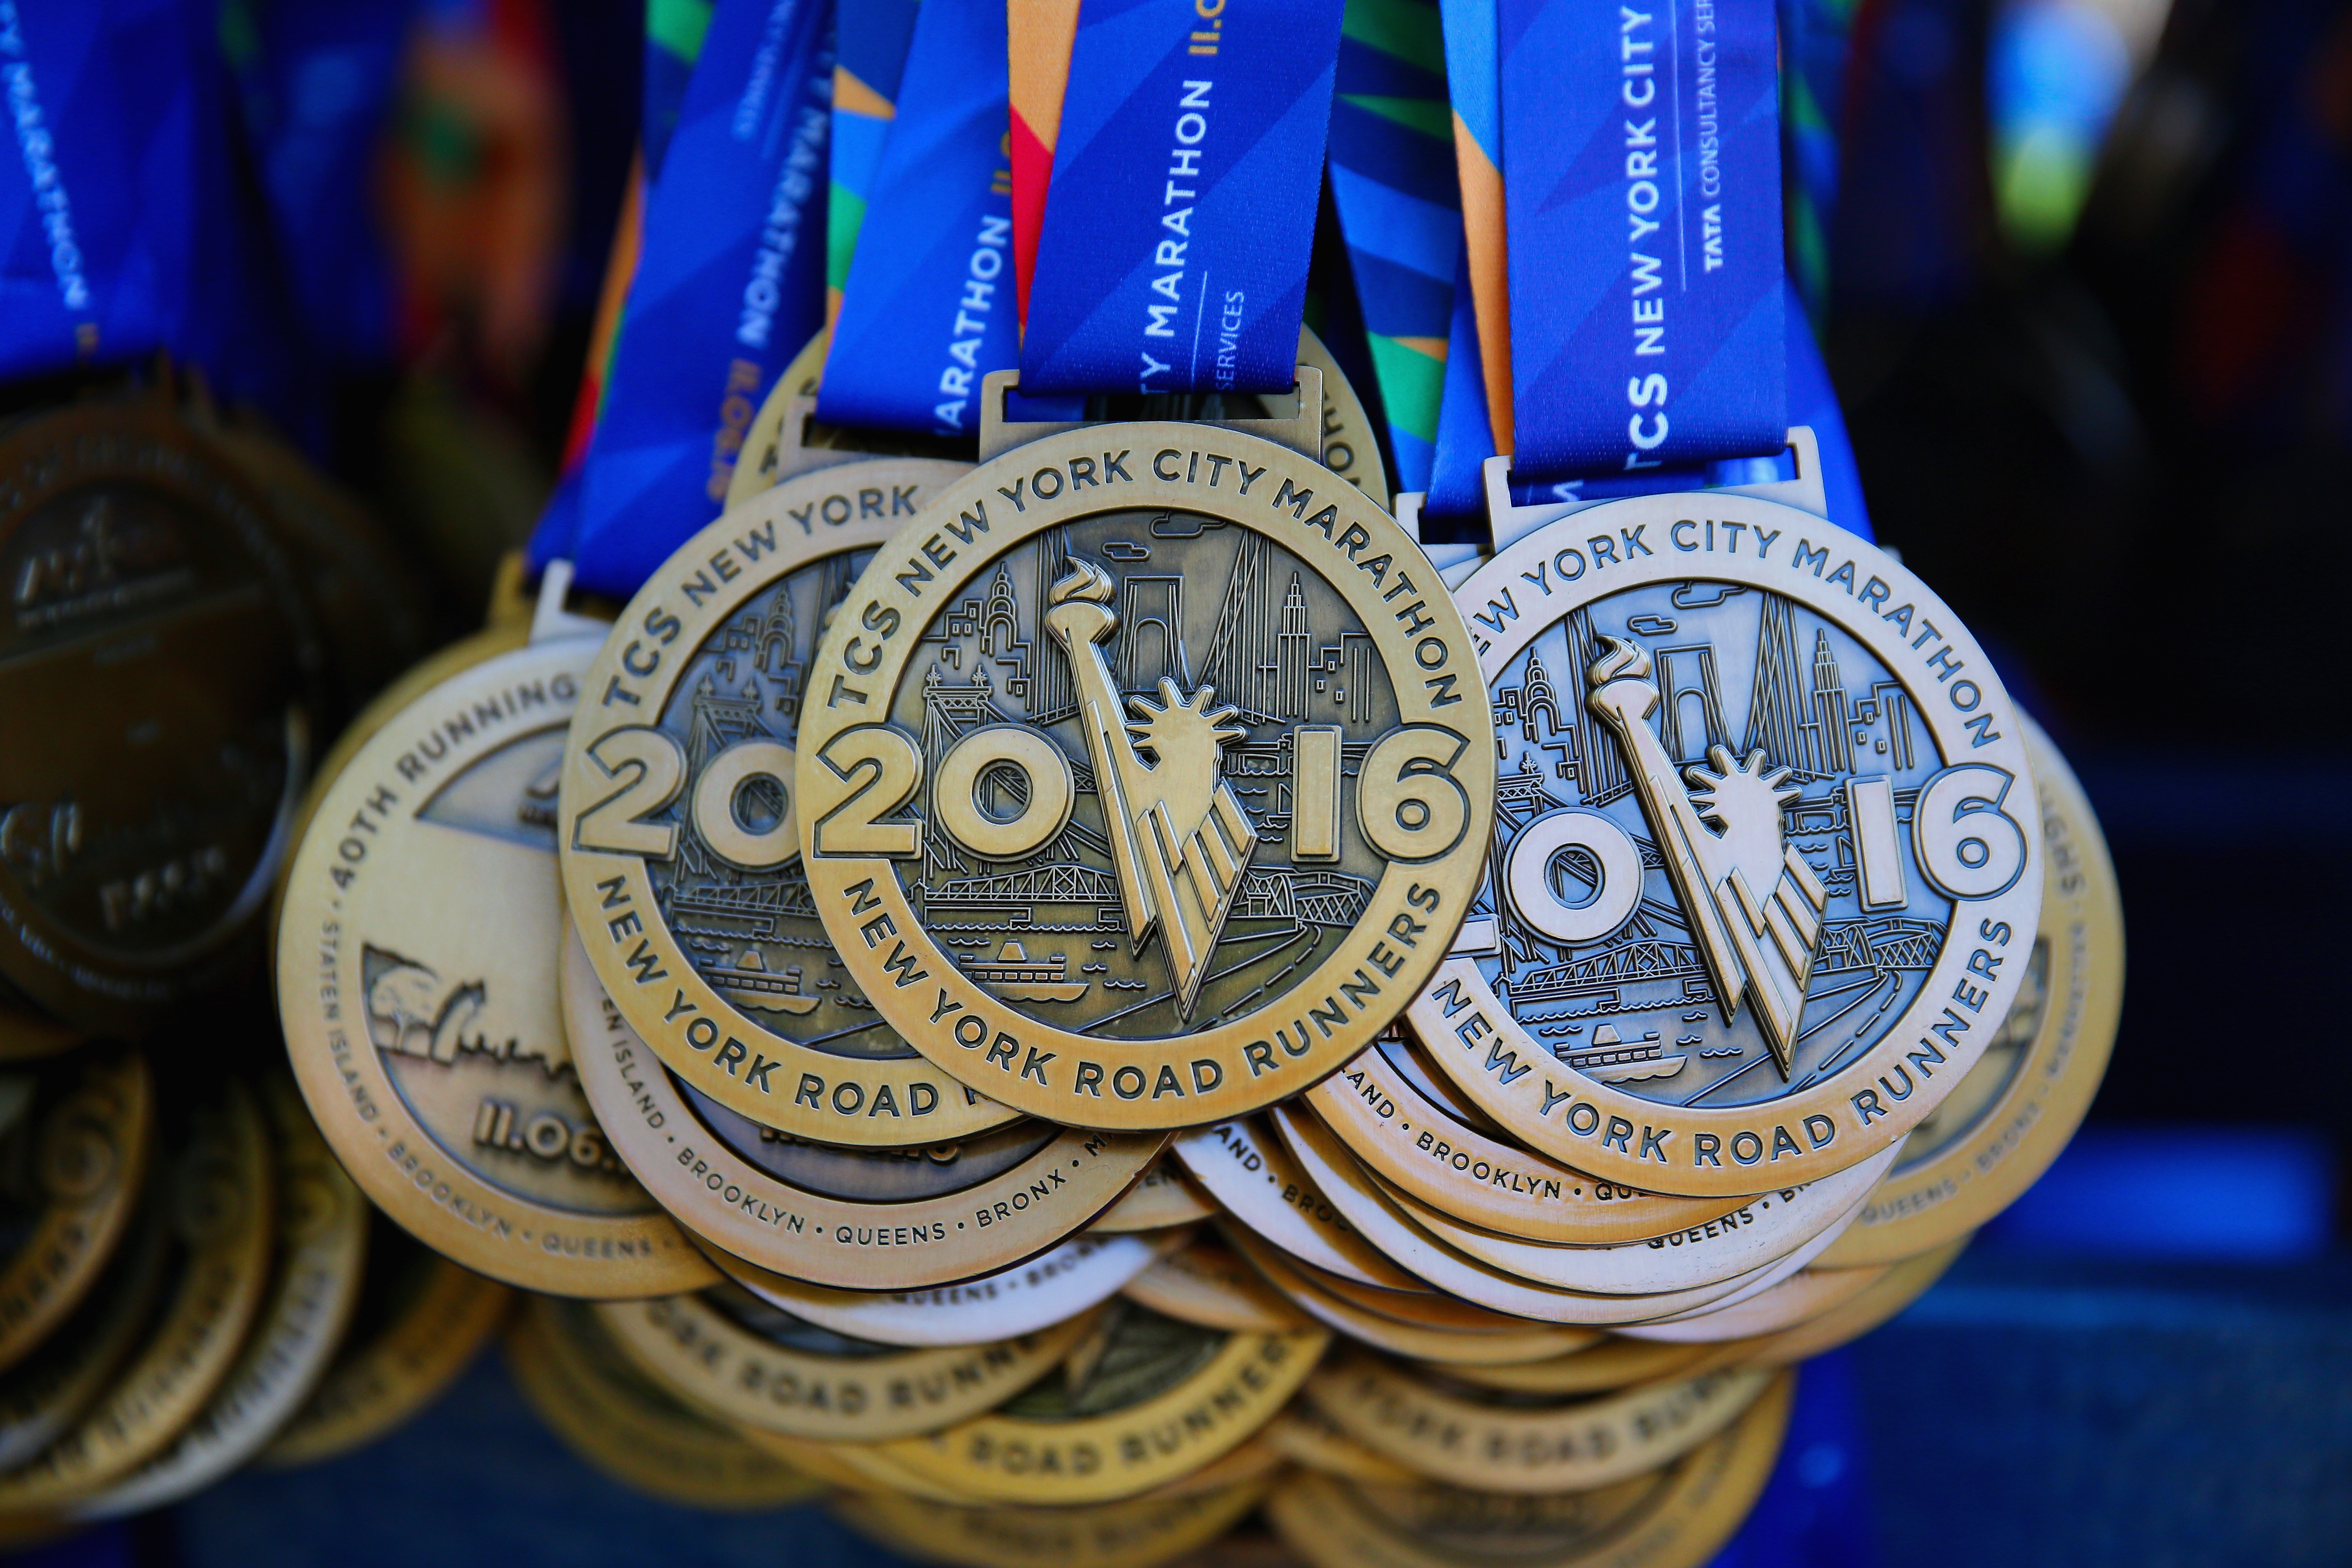 These are the medals you get if you complete the NYC Marathon For The Win